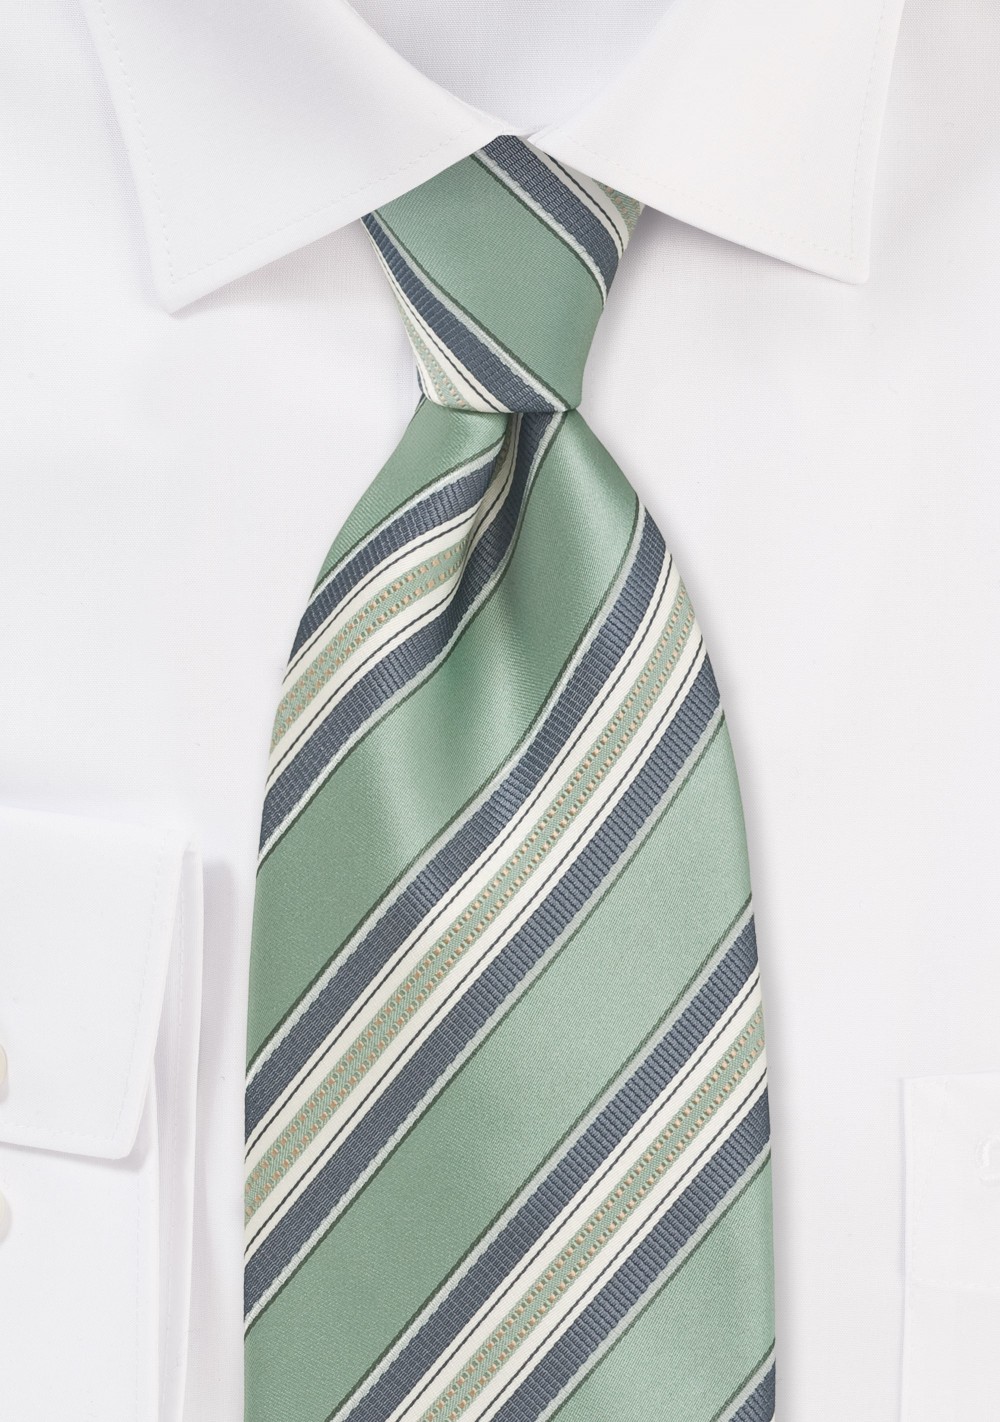 Striped XL Length Tie in Clover Green